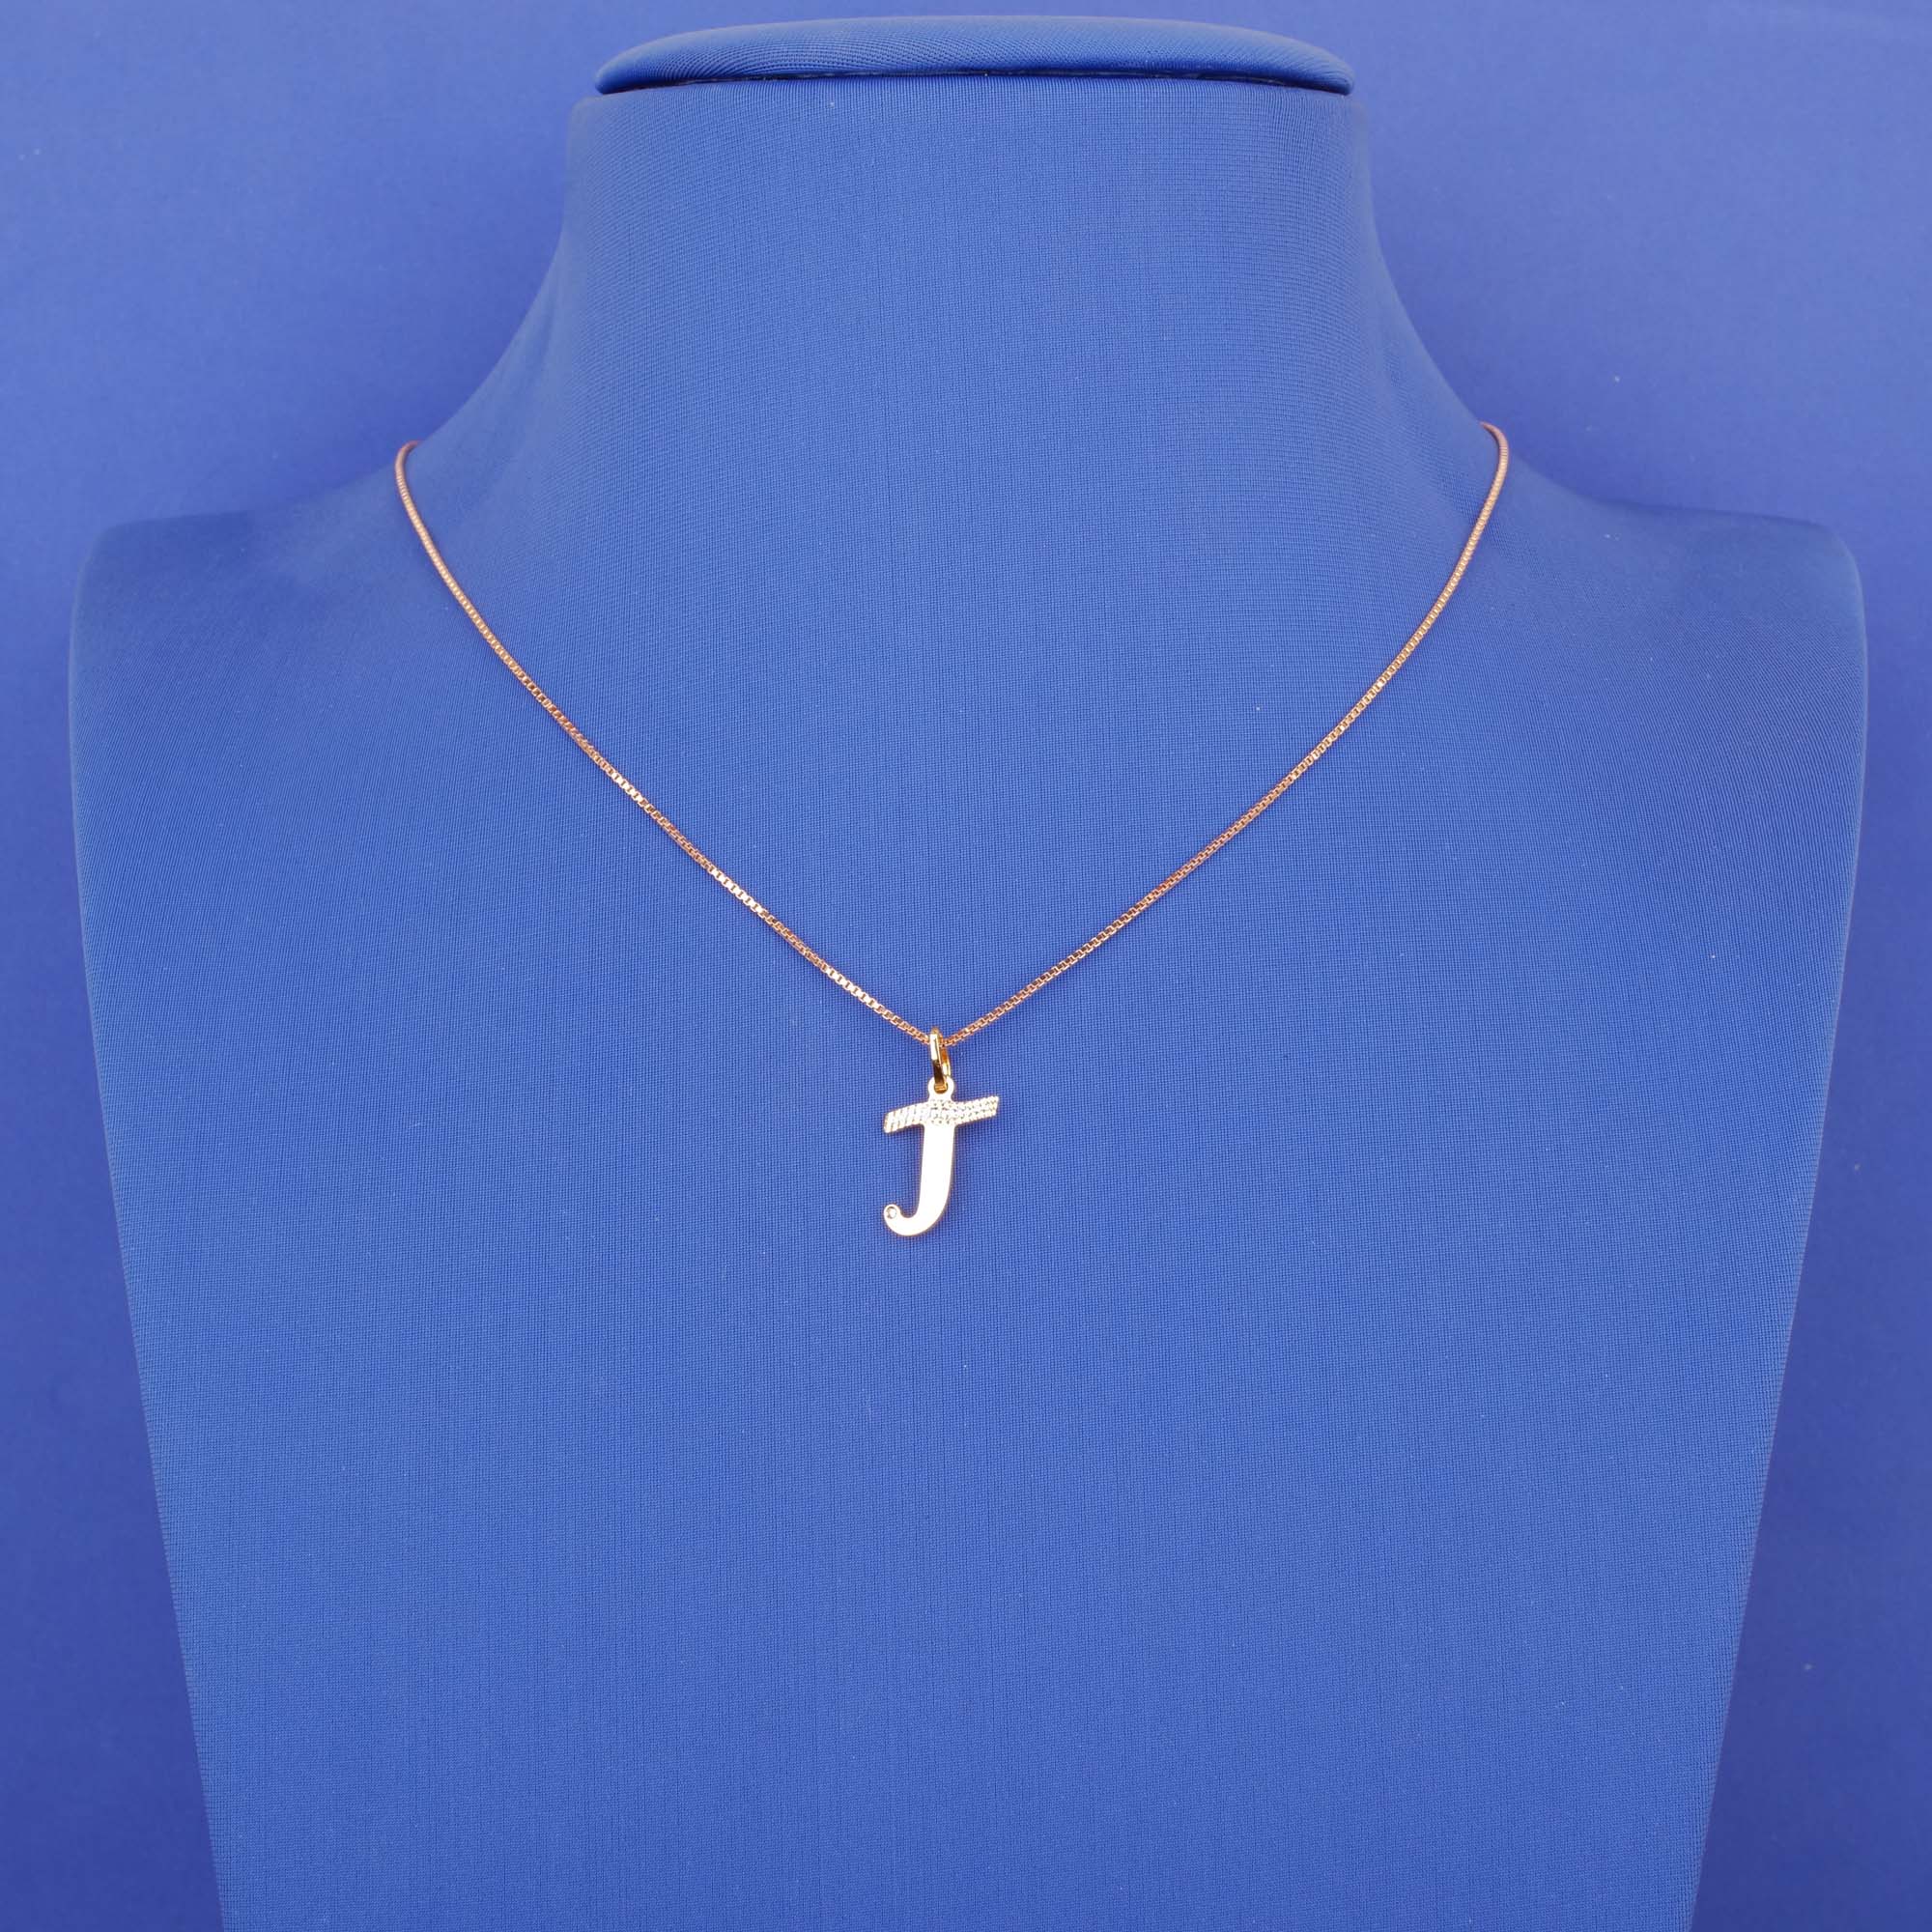 22K 'J' Tri-Color Pendant (chain not included)